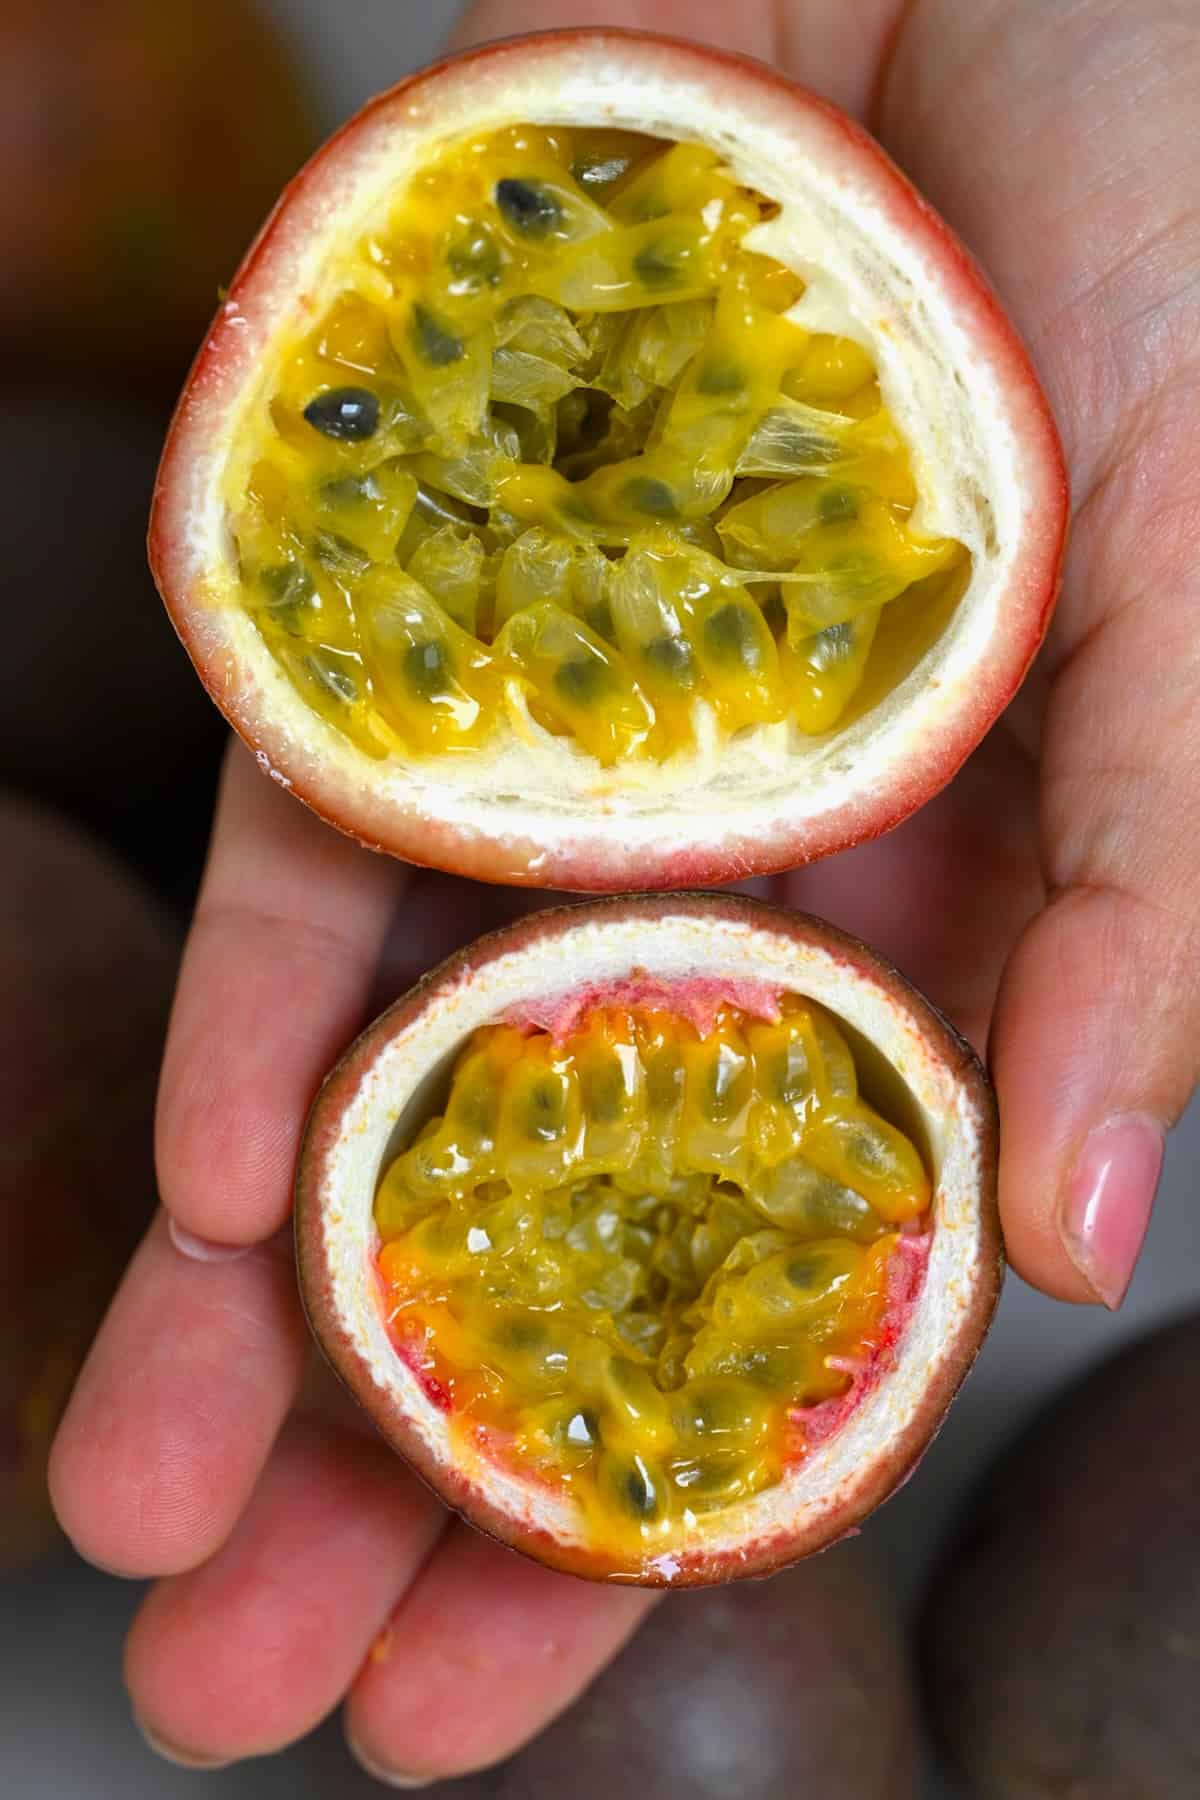 One passion fruit cut in two